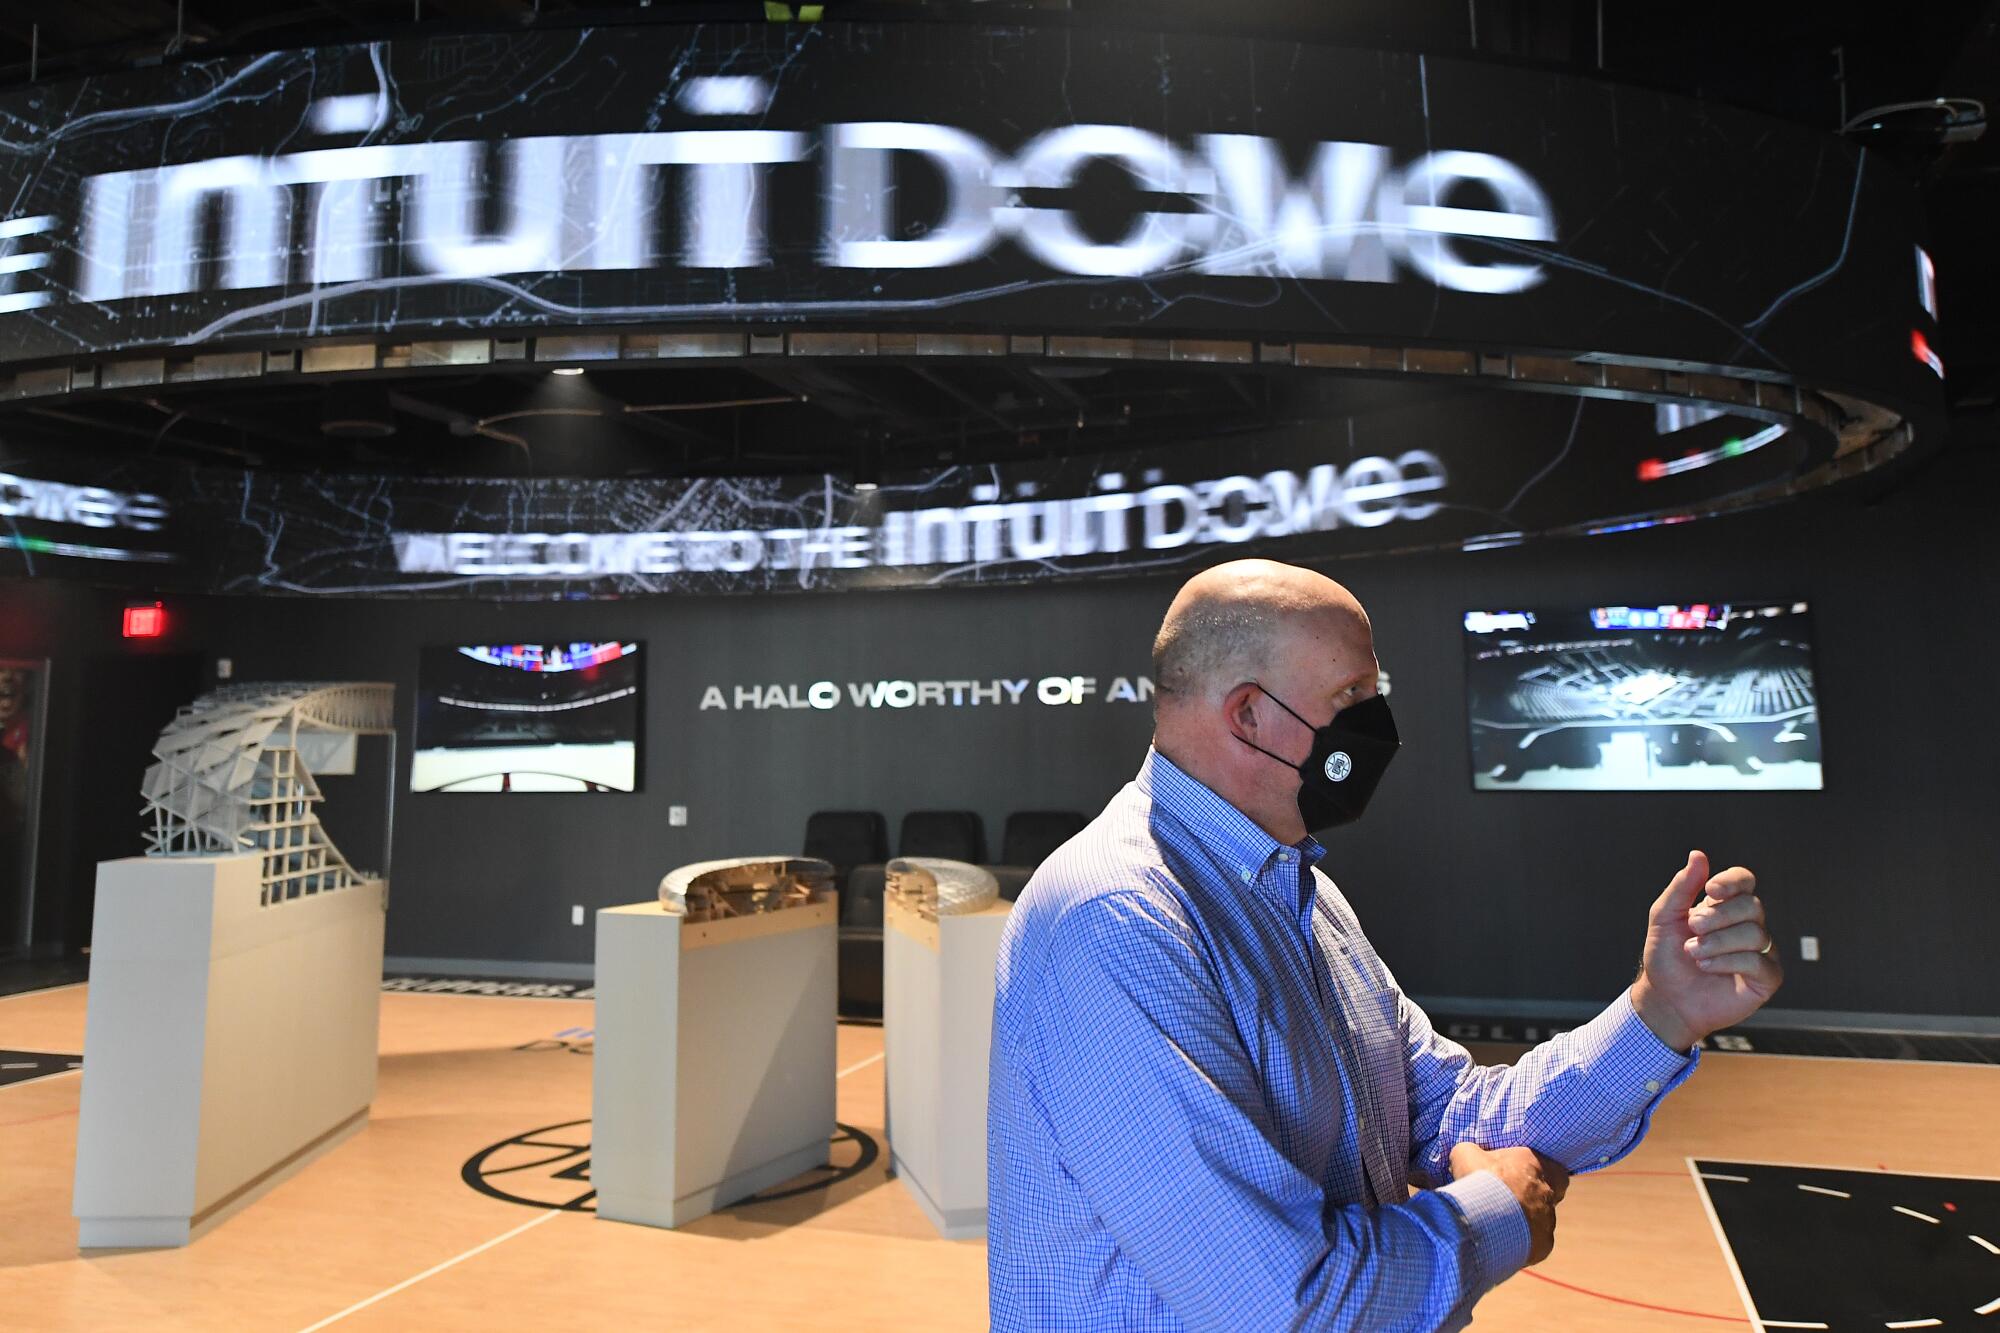 Clippers owner Steve Ballmer stands in front of a model of The Intuit Dome.